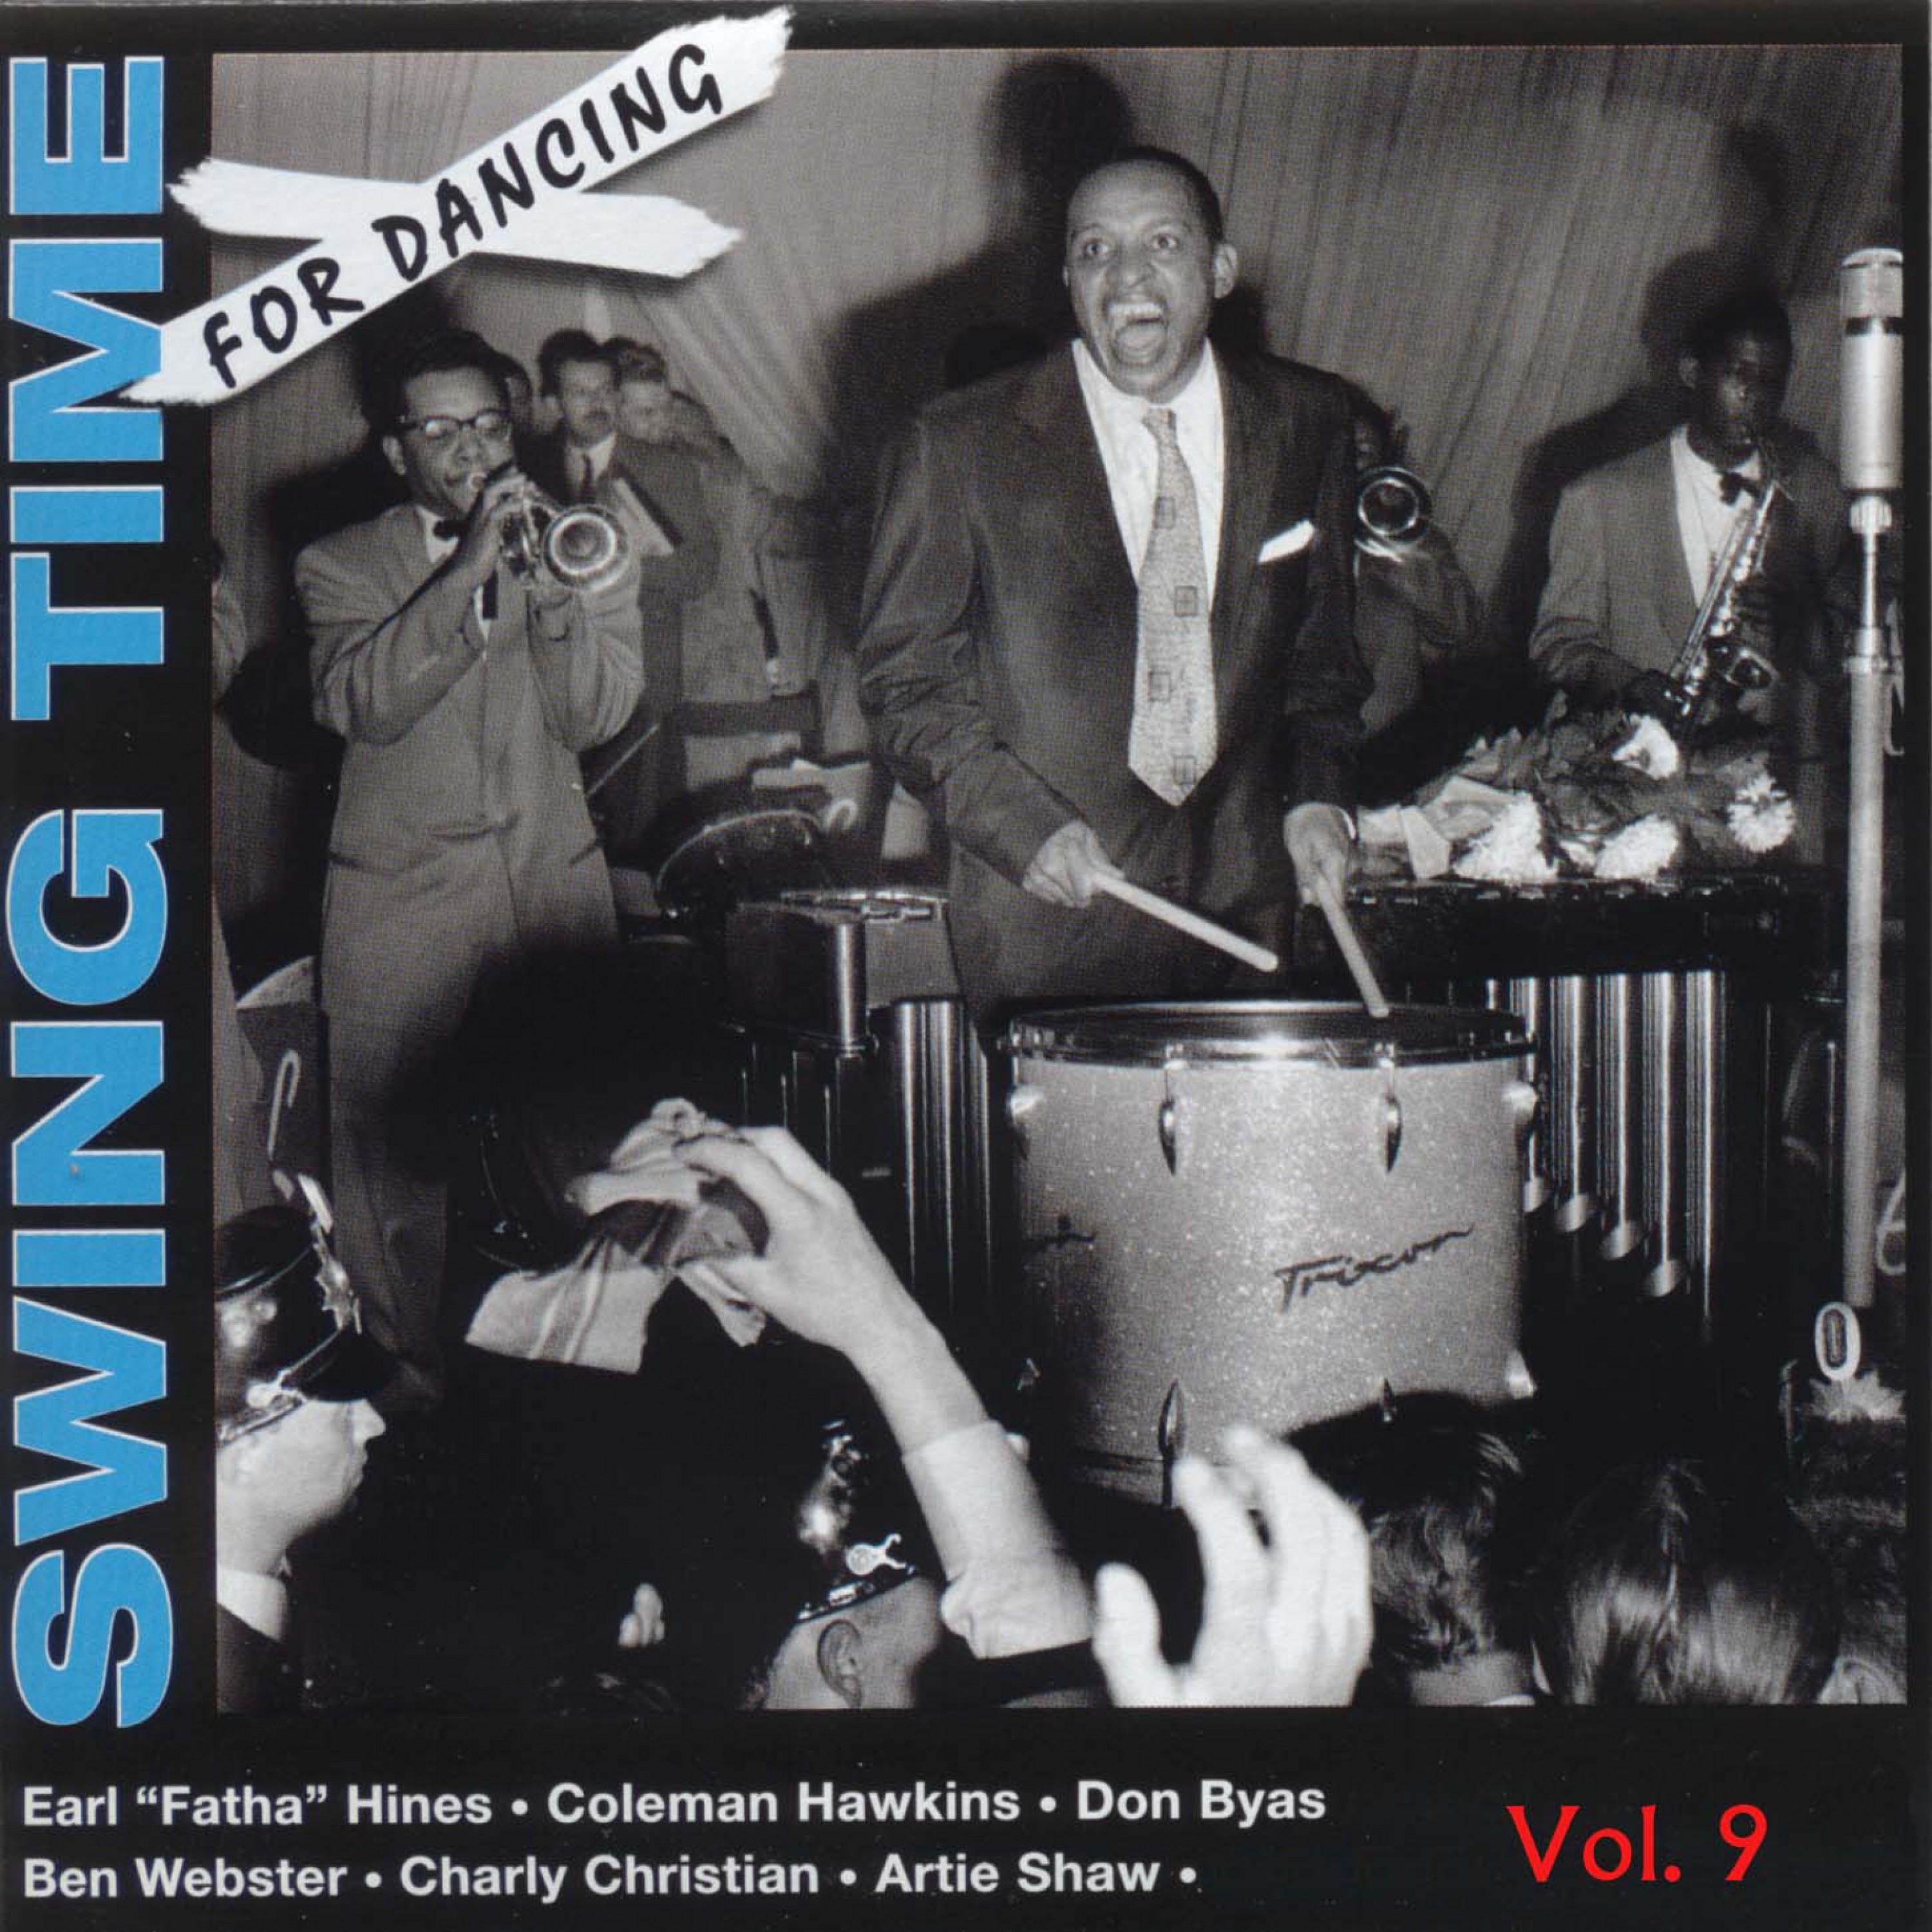 Swing Time for Dancing Vol. 9